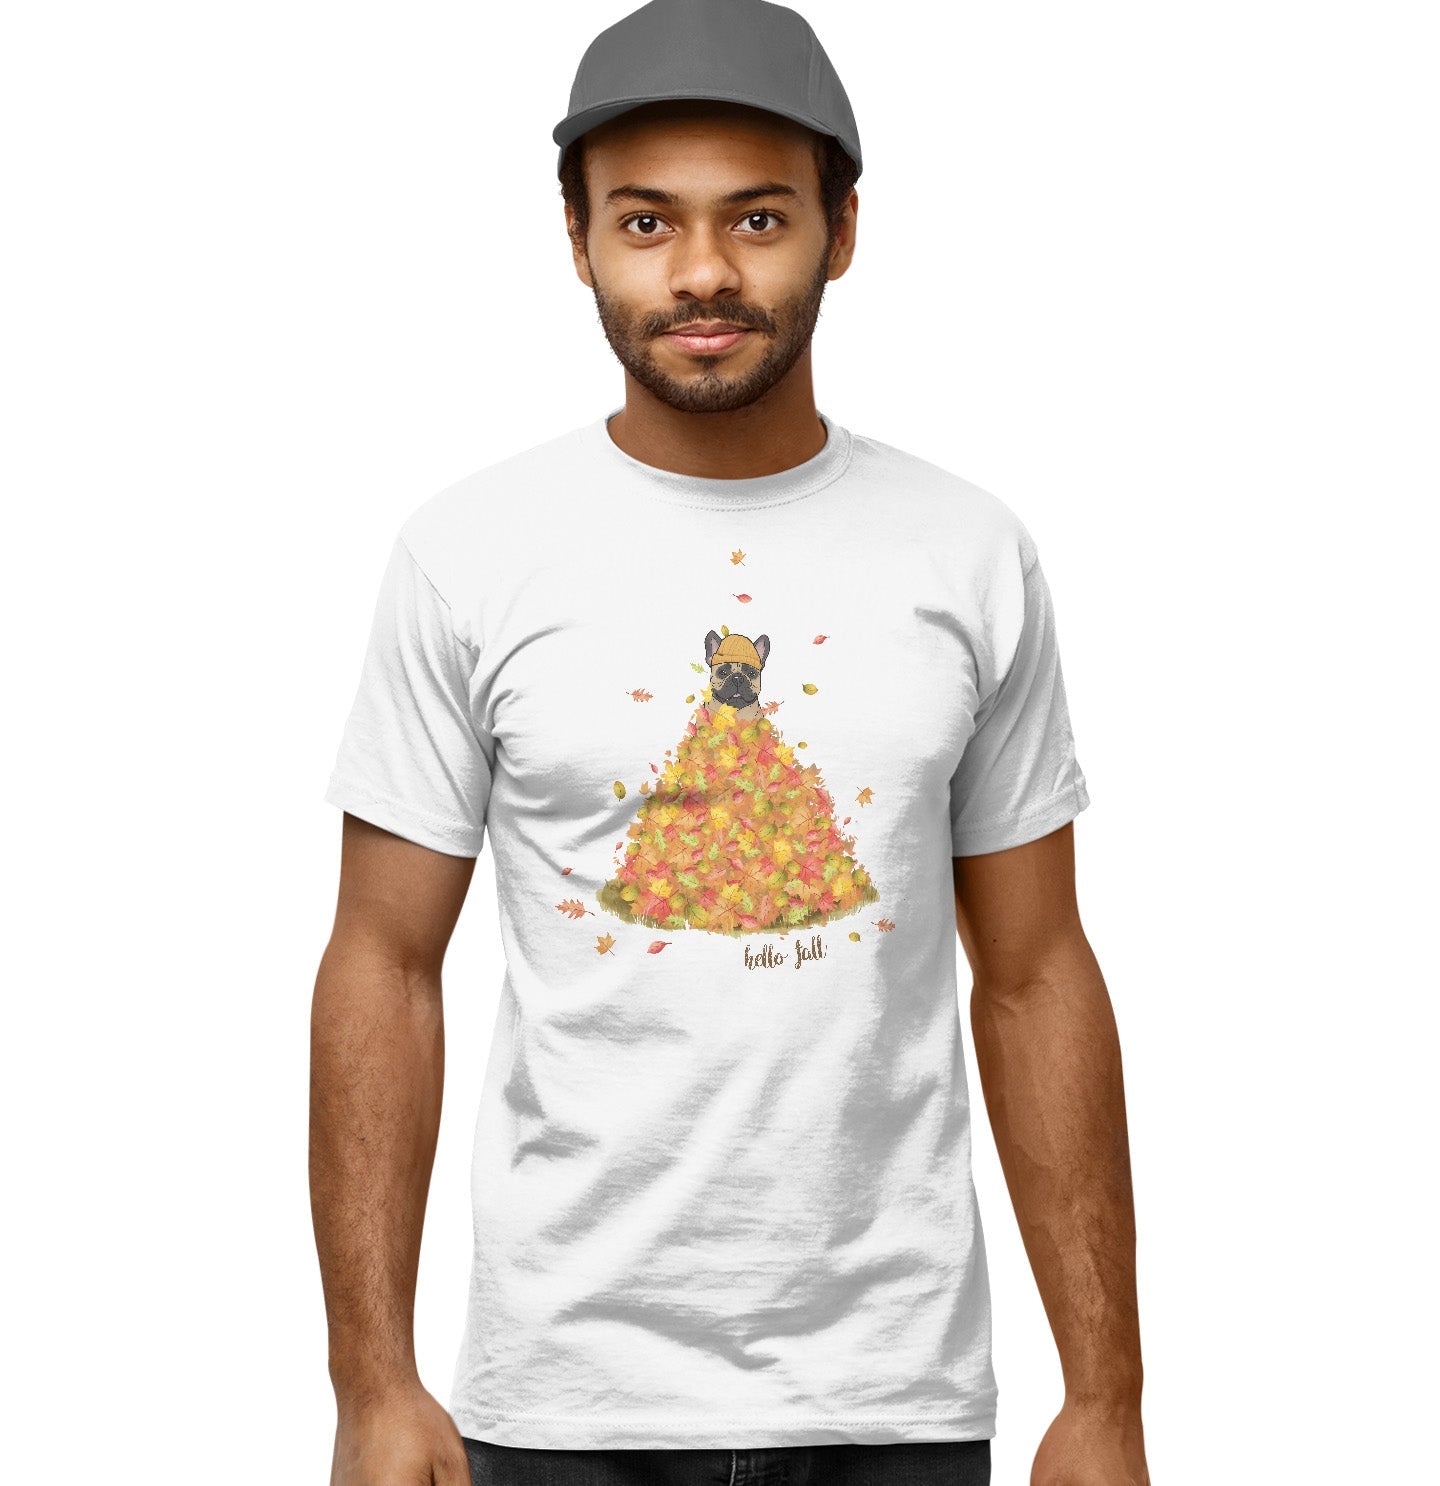 Leaf Pile and Frenchie - Adult Unisex T-Shirt